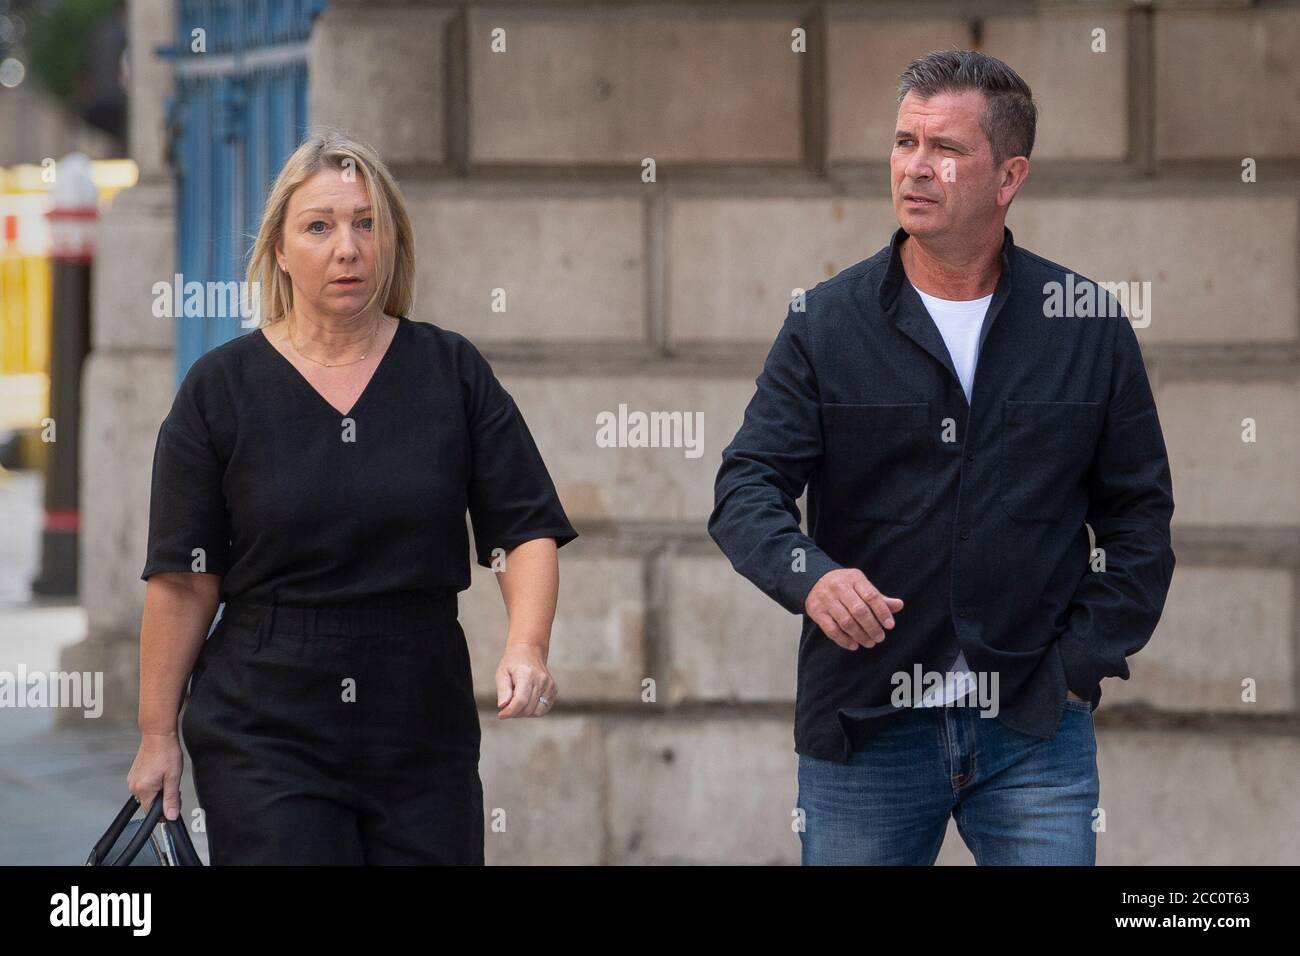 Rikki Nicholls, 55, and Sharon Nicholls, 56, arrive at the City of London Magistrates' Court charged over an alleged ??22m pension fraud, in a case which is claimed to involve 275 victims. Stock Photo